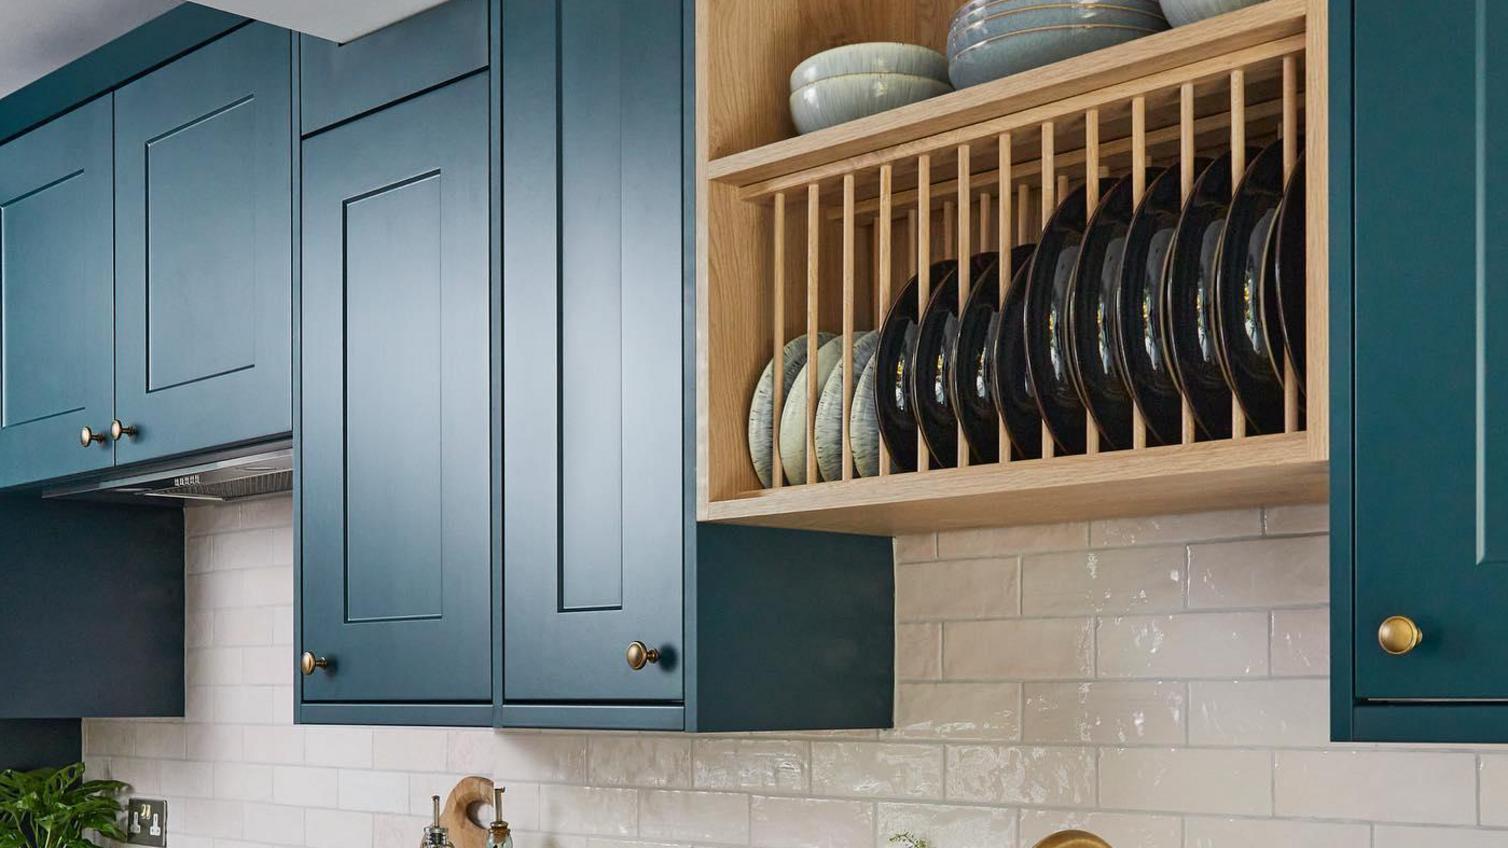 A small shaker kitchen from the Chelford marine blue range. The shot includes wall-mounted plate racks and brass accessories